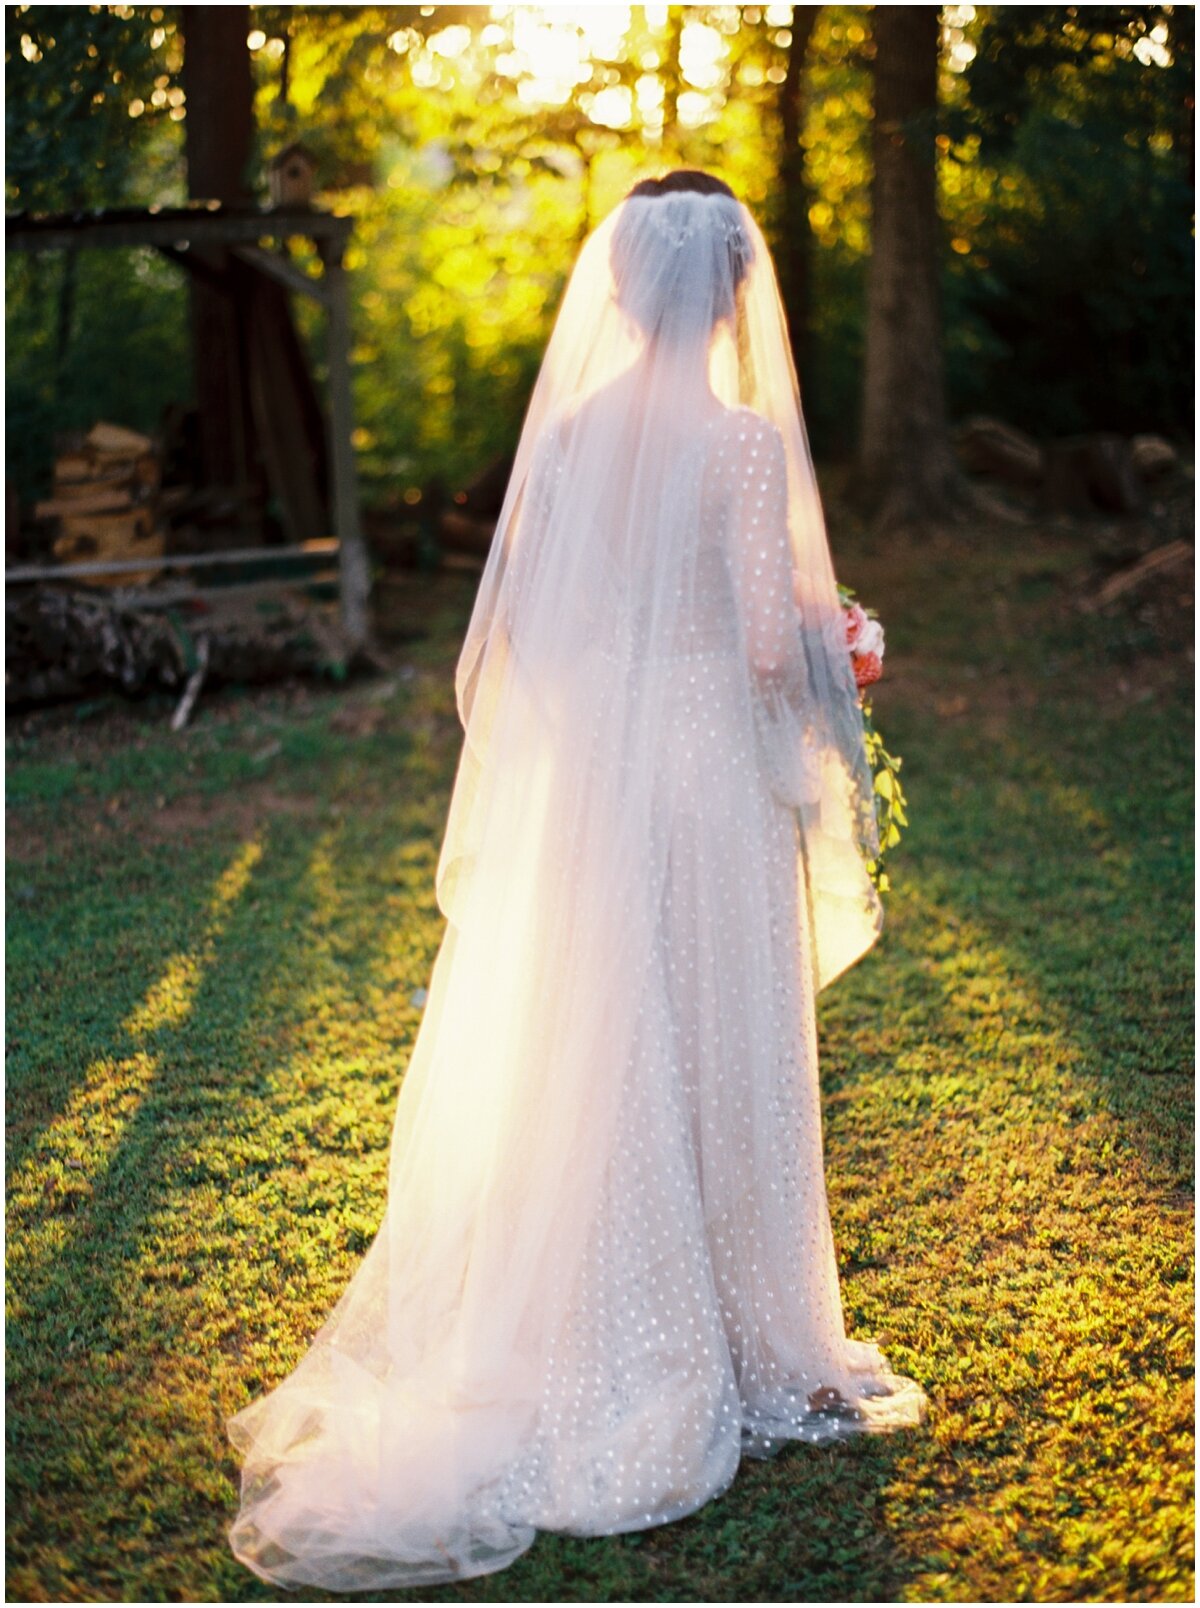 bridal portraits sunset outdoor wedding knoxville tn